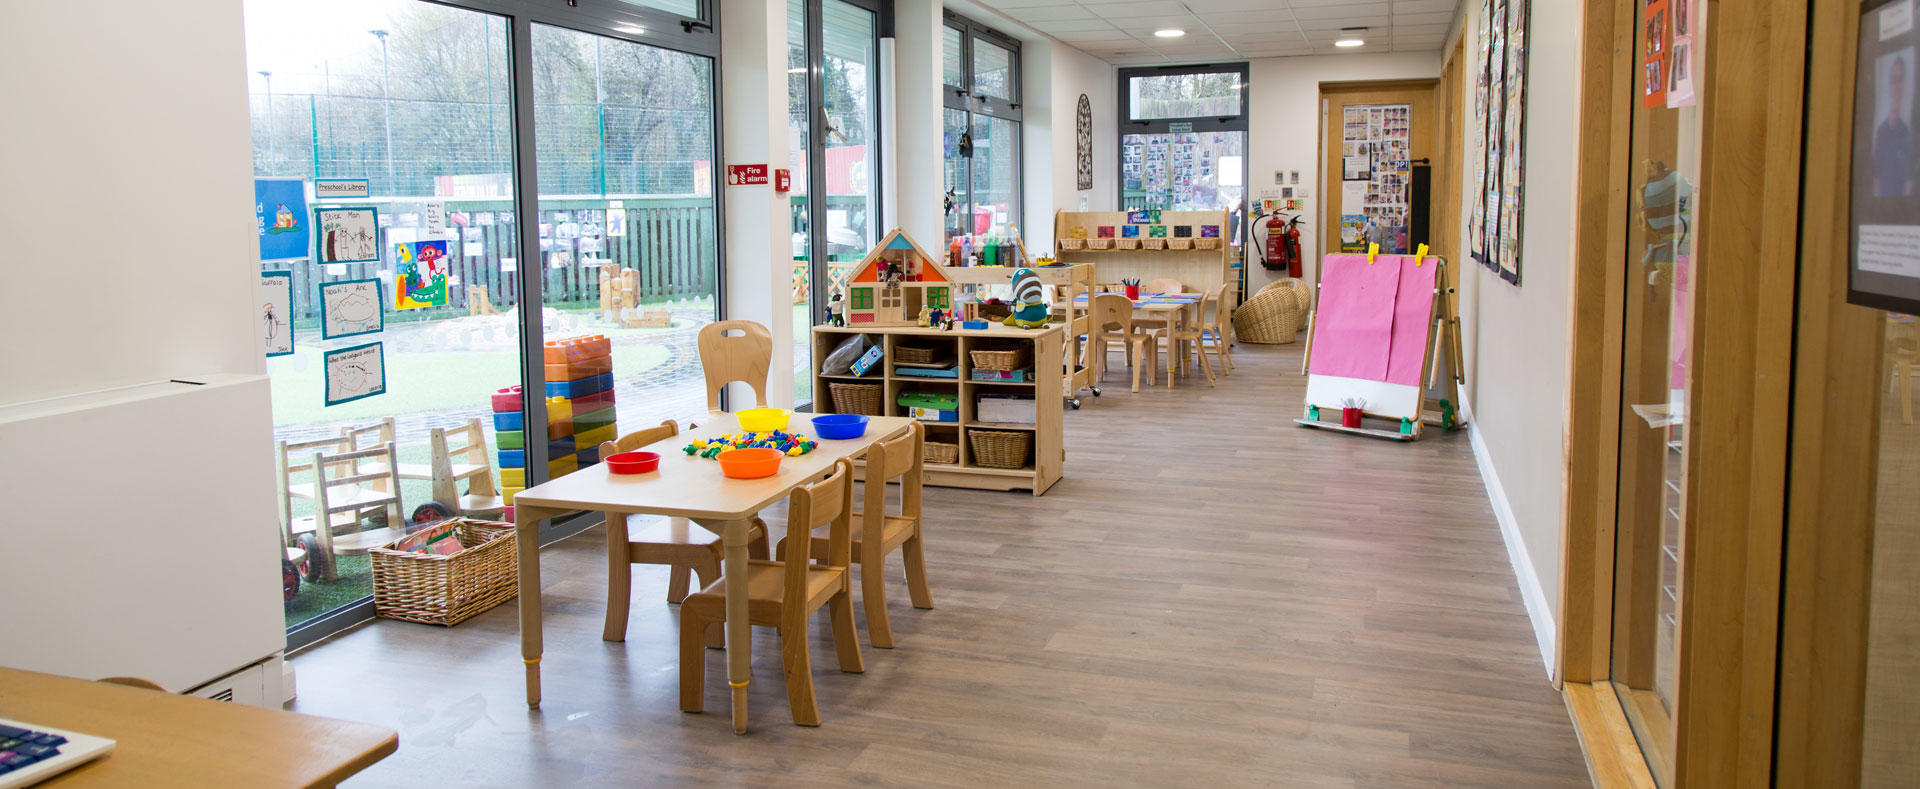 Images Bright Horizons North Cheam Day Nursery and Preschool